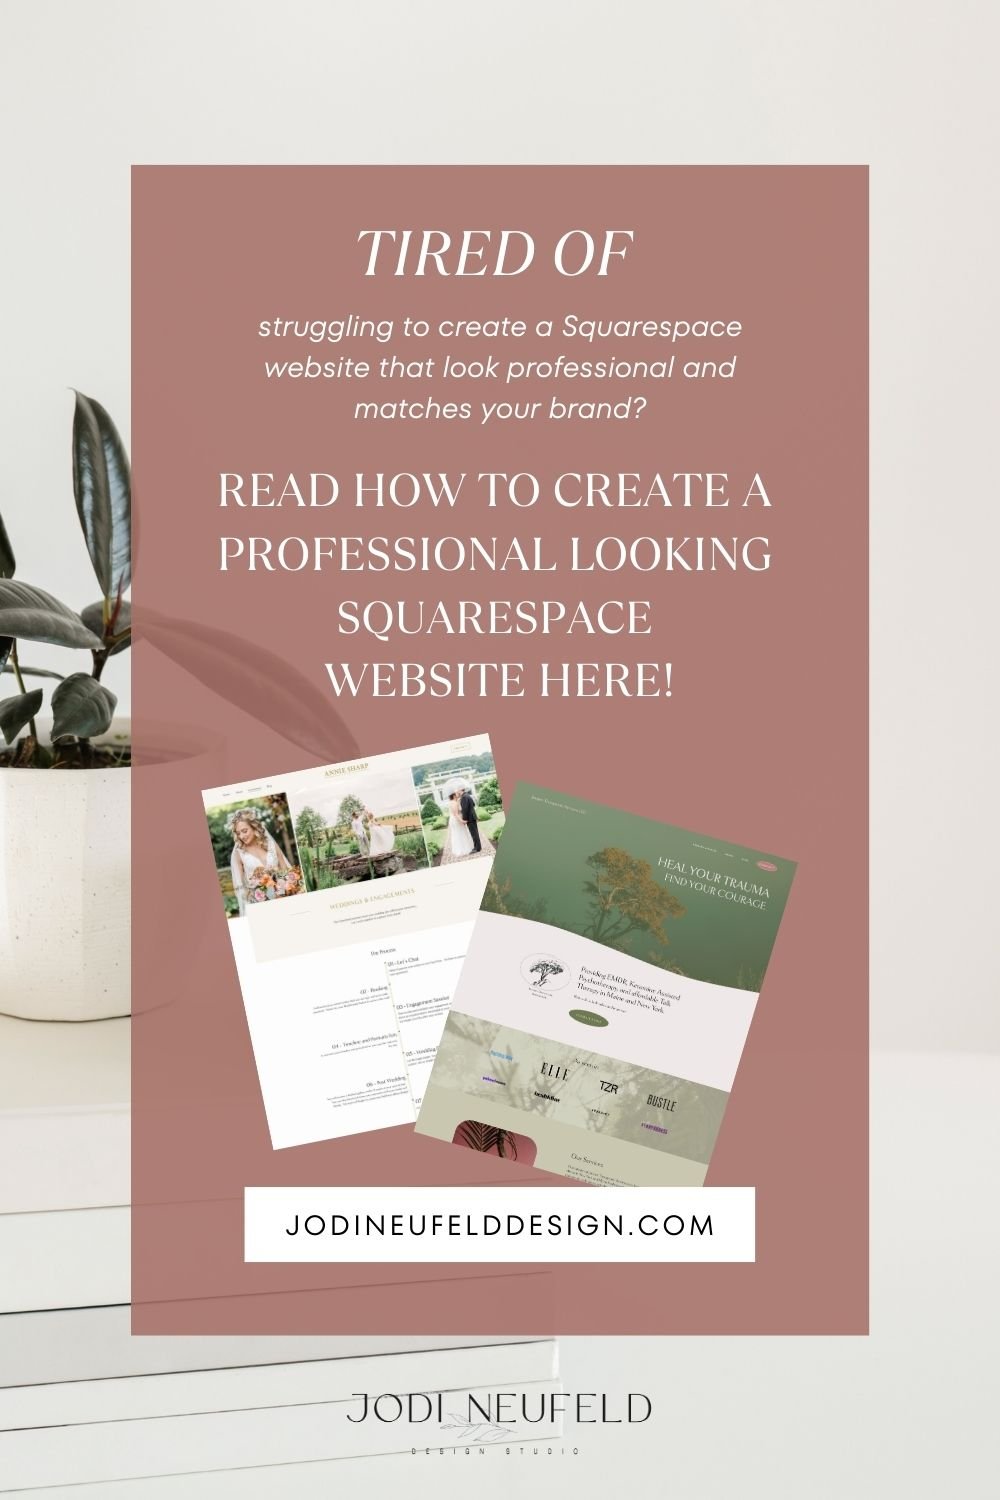 How to Build your Squarespace website efficiently - tips and tricks 5.jpg